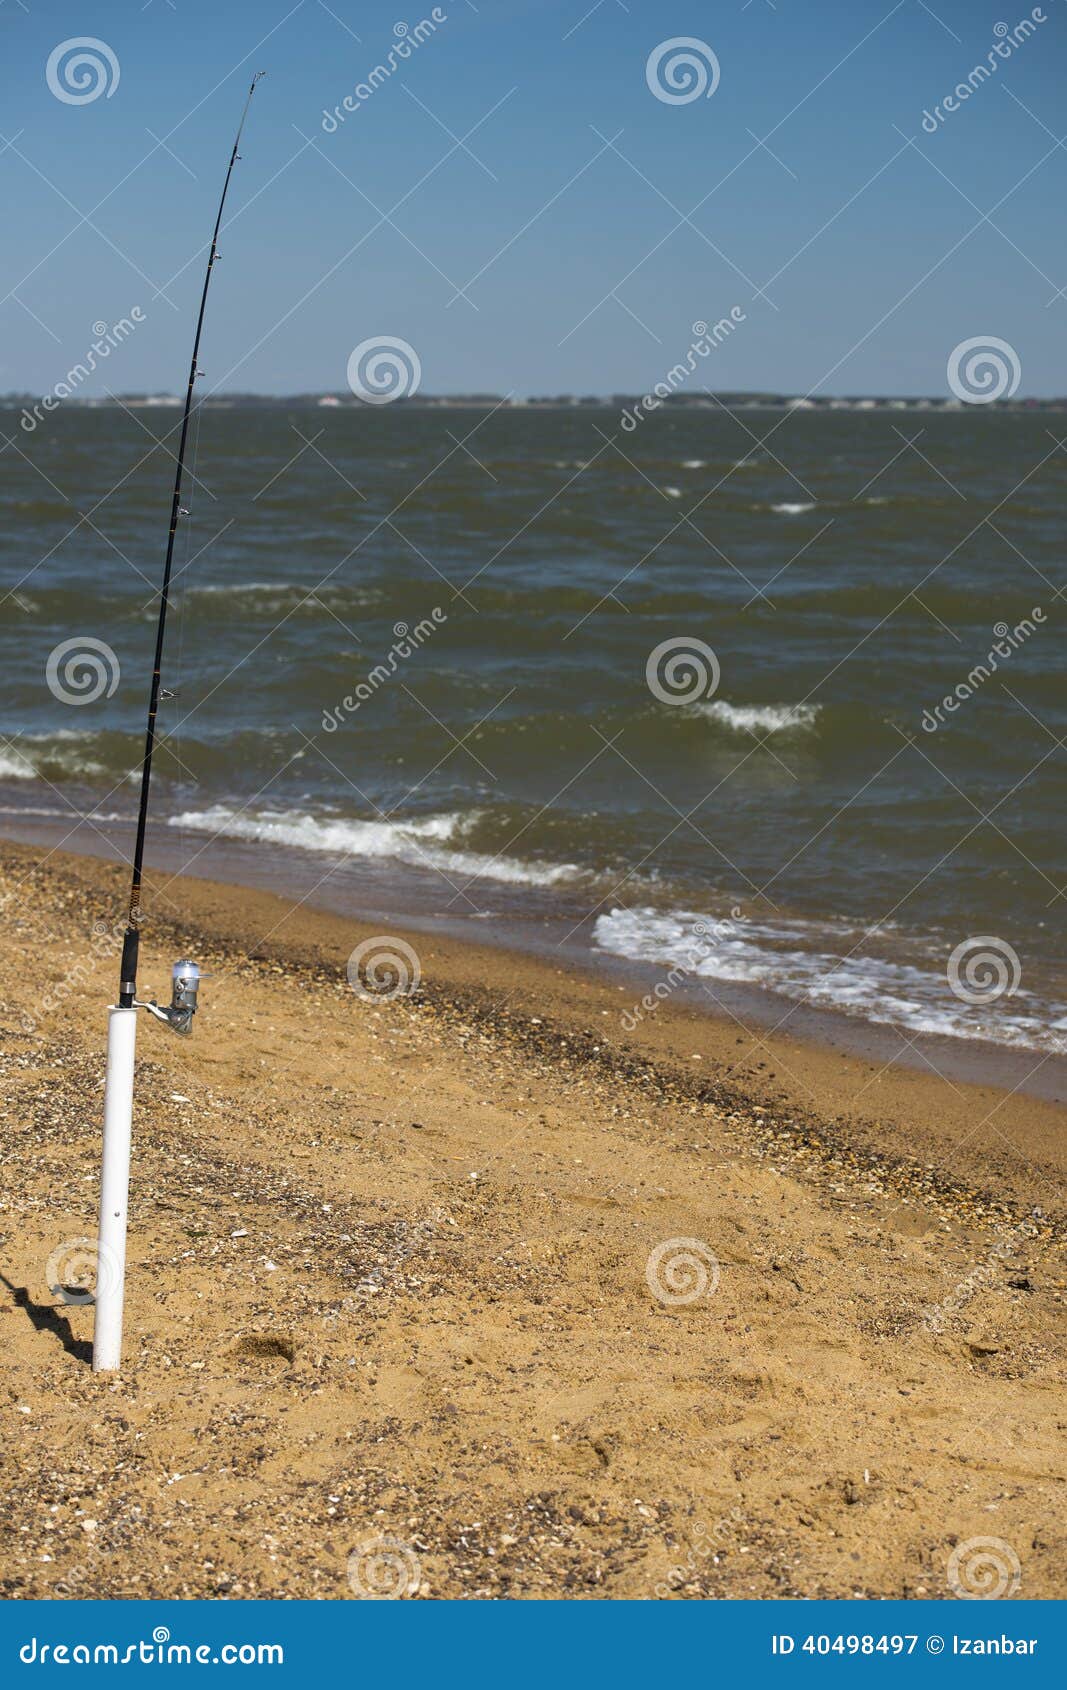 Fishing pole on the beach stock image. Image of vacation - 40498497